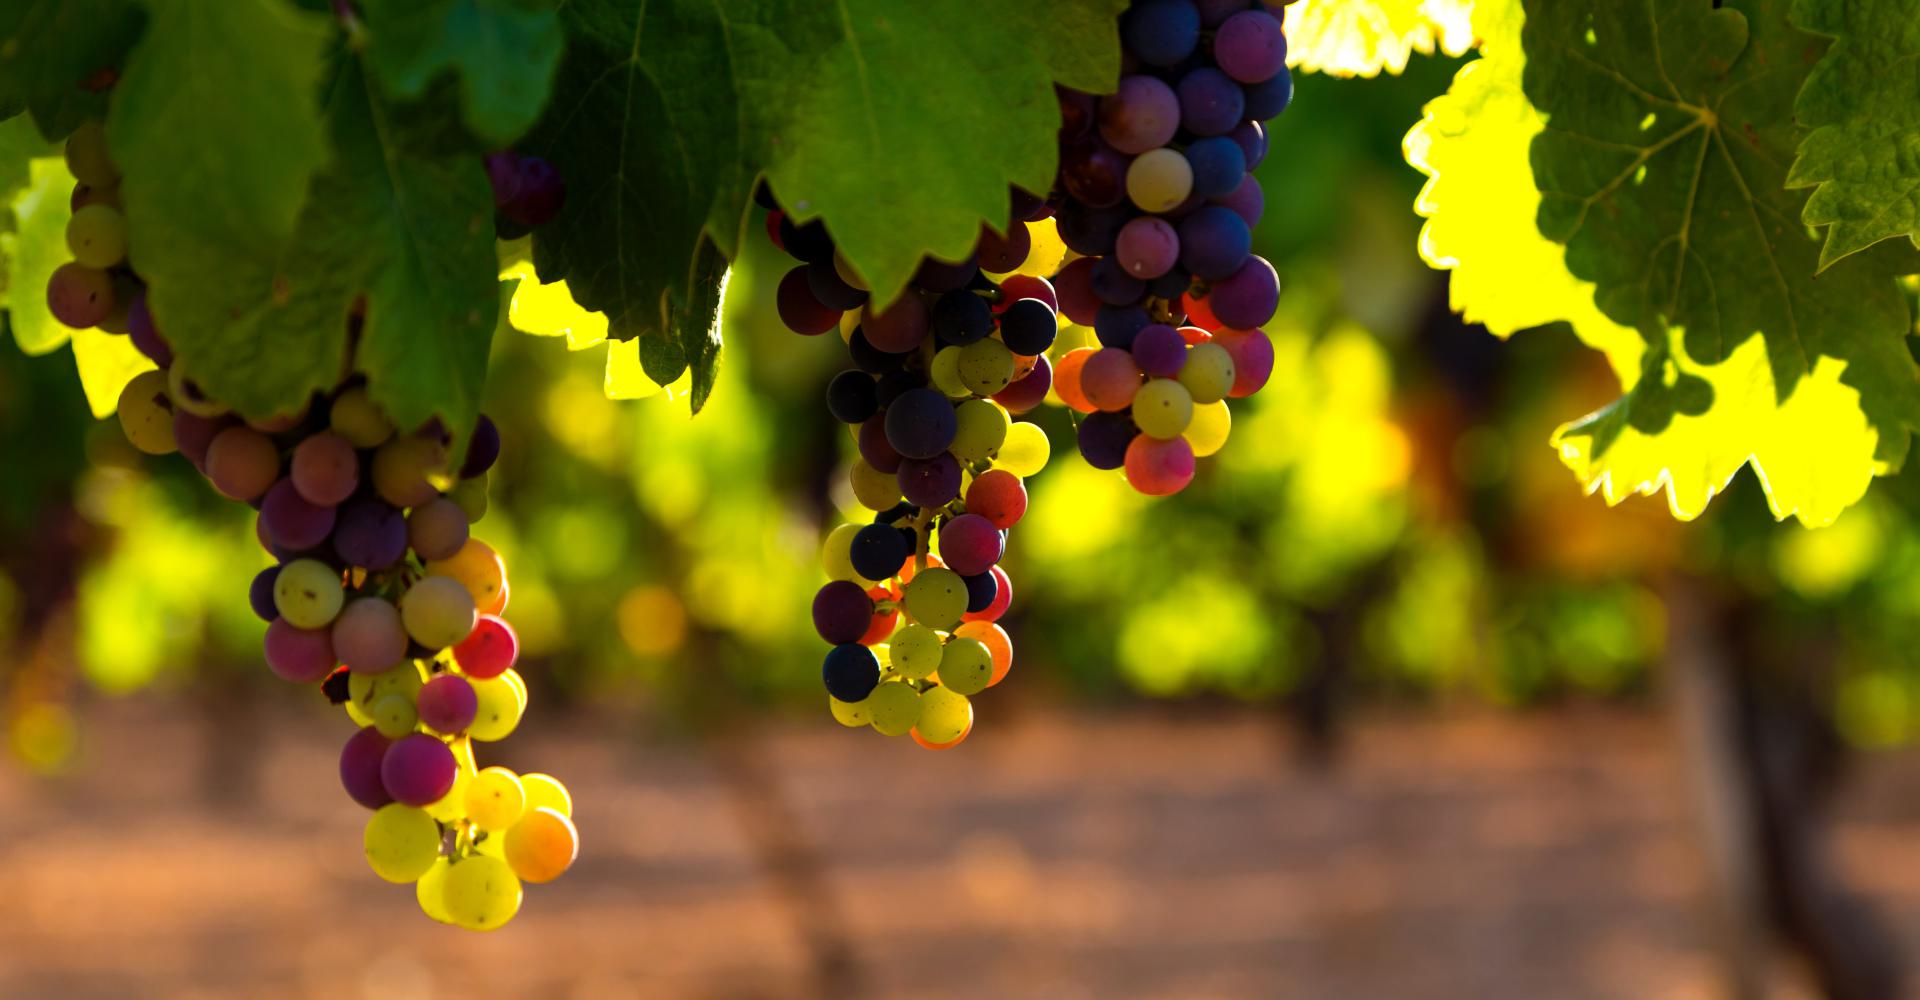 Grapes ripening on the vine